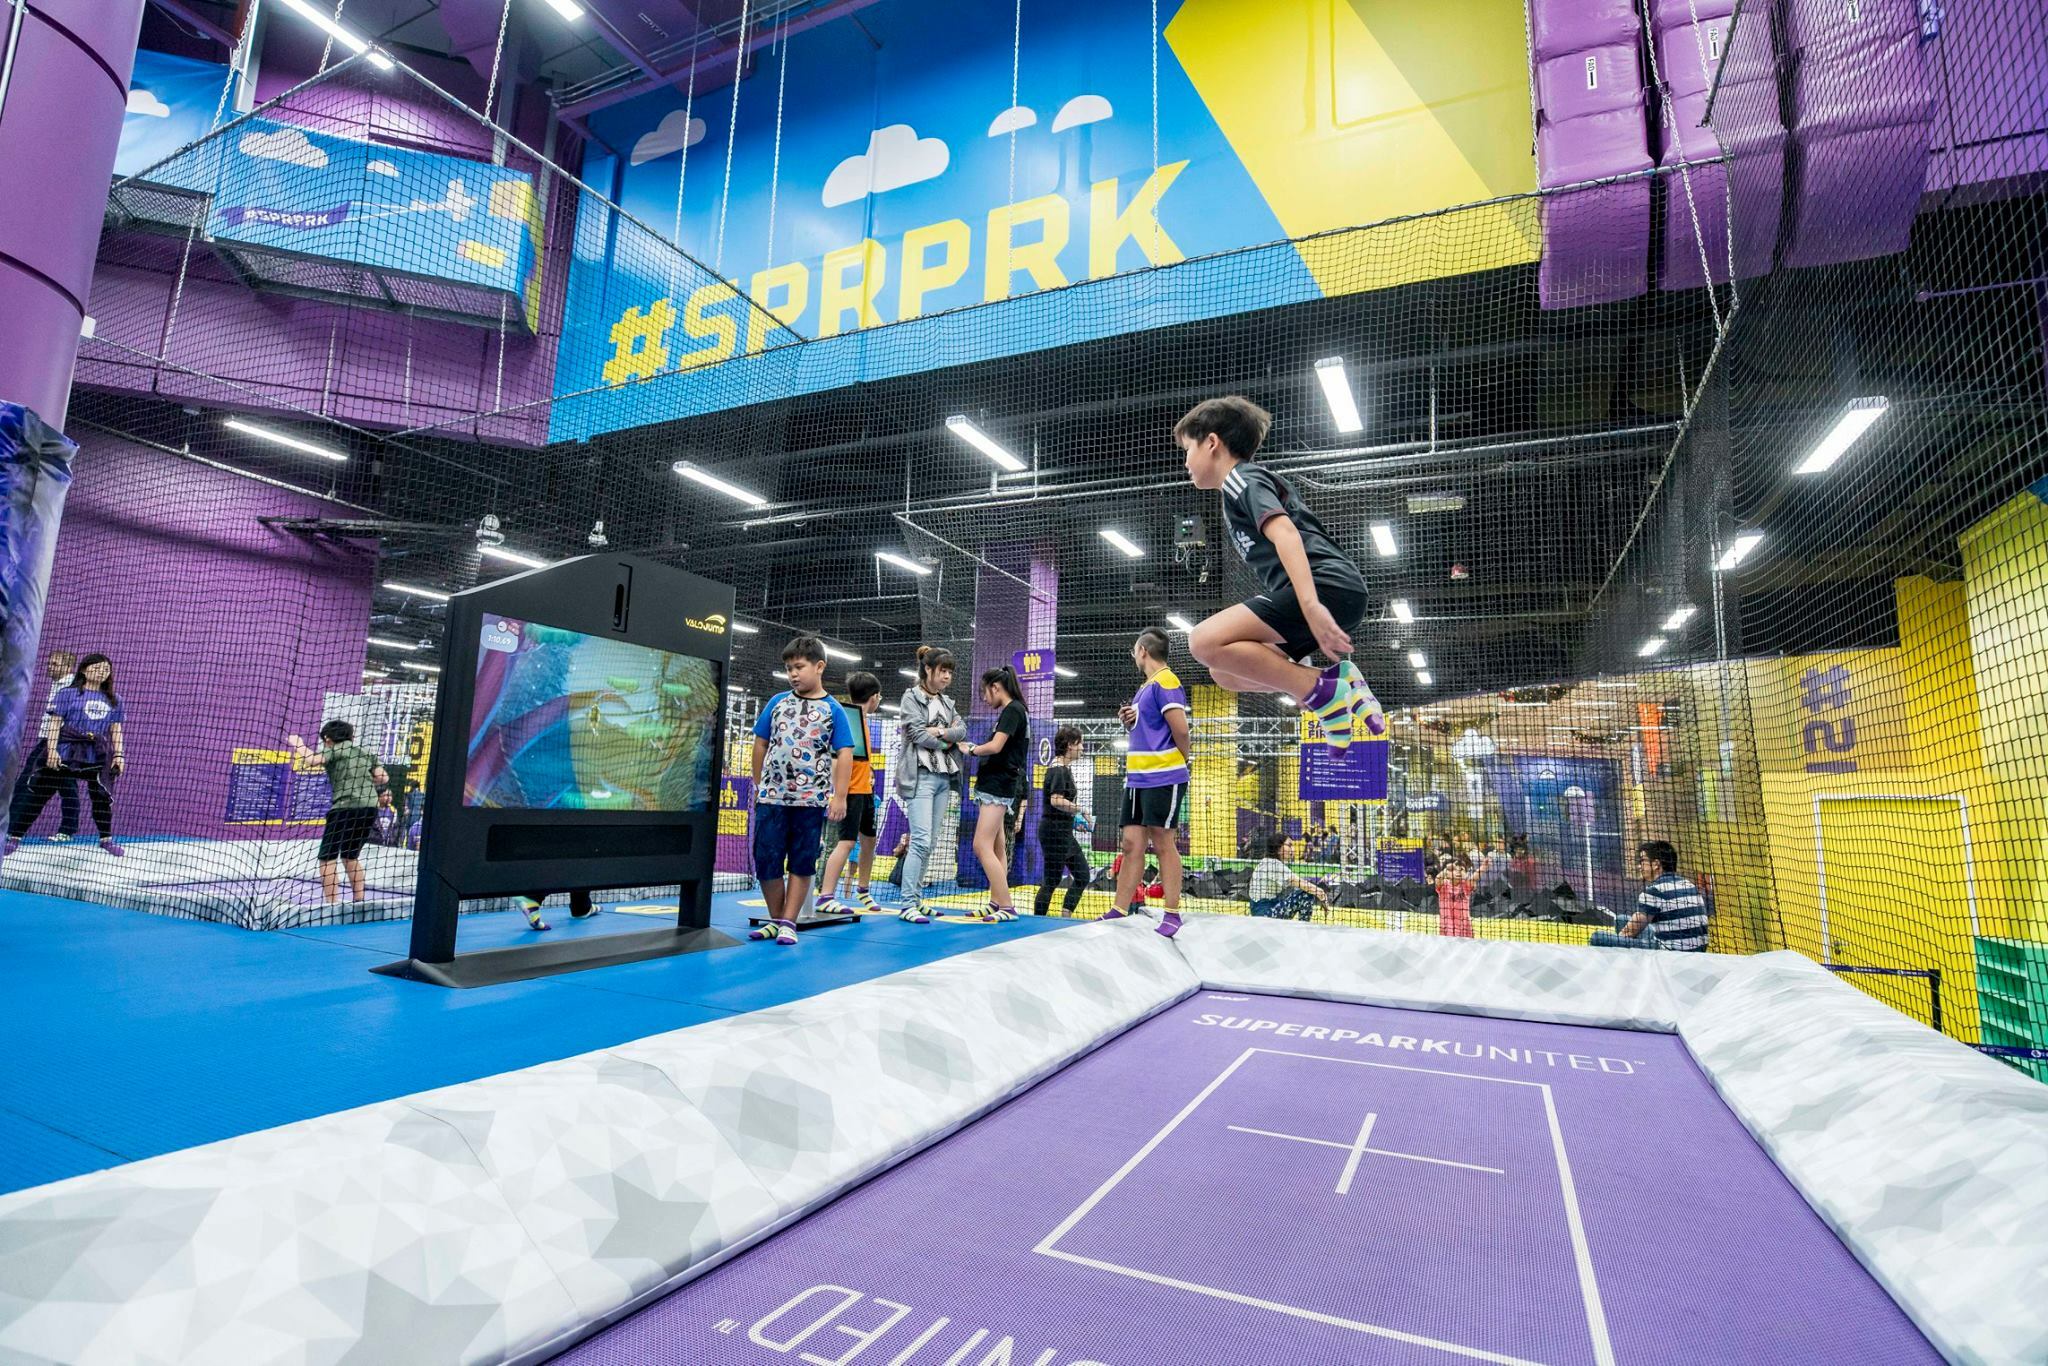 singapore indoor superpark places playground playgrounds attractions play friendly suntec trampoline teenagers wild singaporemotherhood